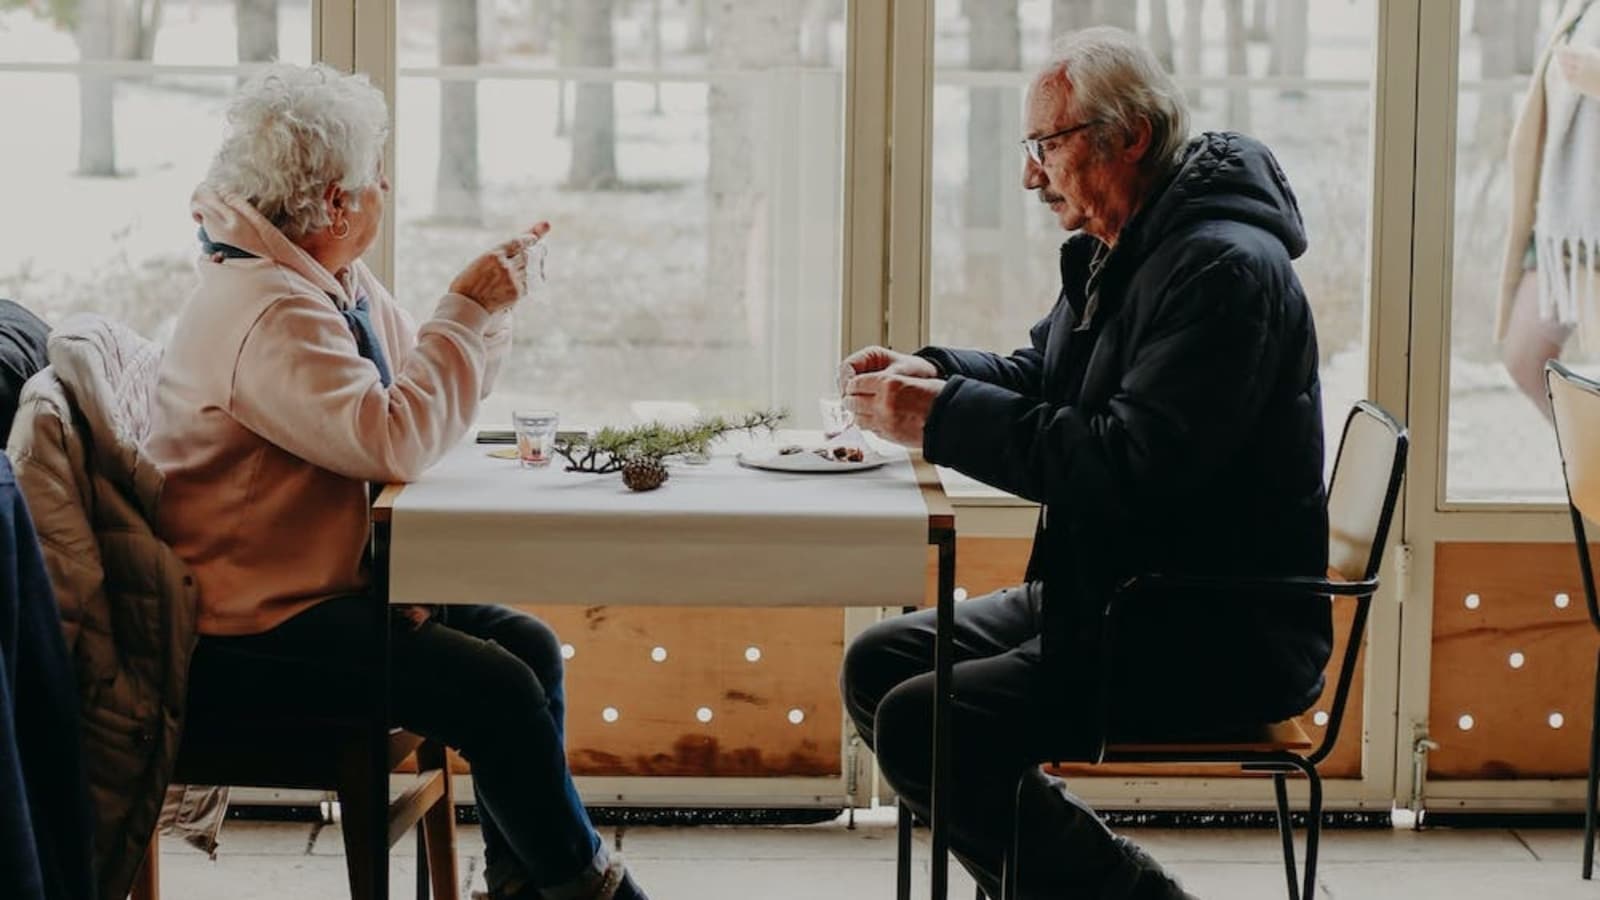 ‘Bill is on us’: When a UK restaurant treated couple on their 50th wedding anniversary. Here’s why